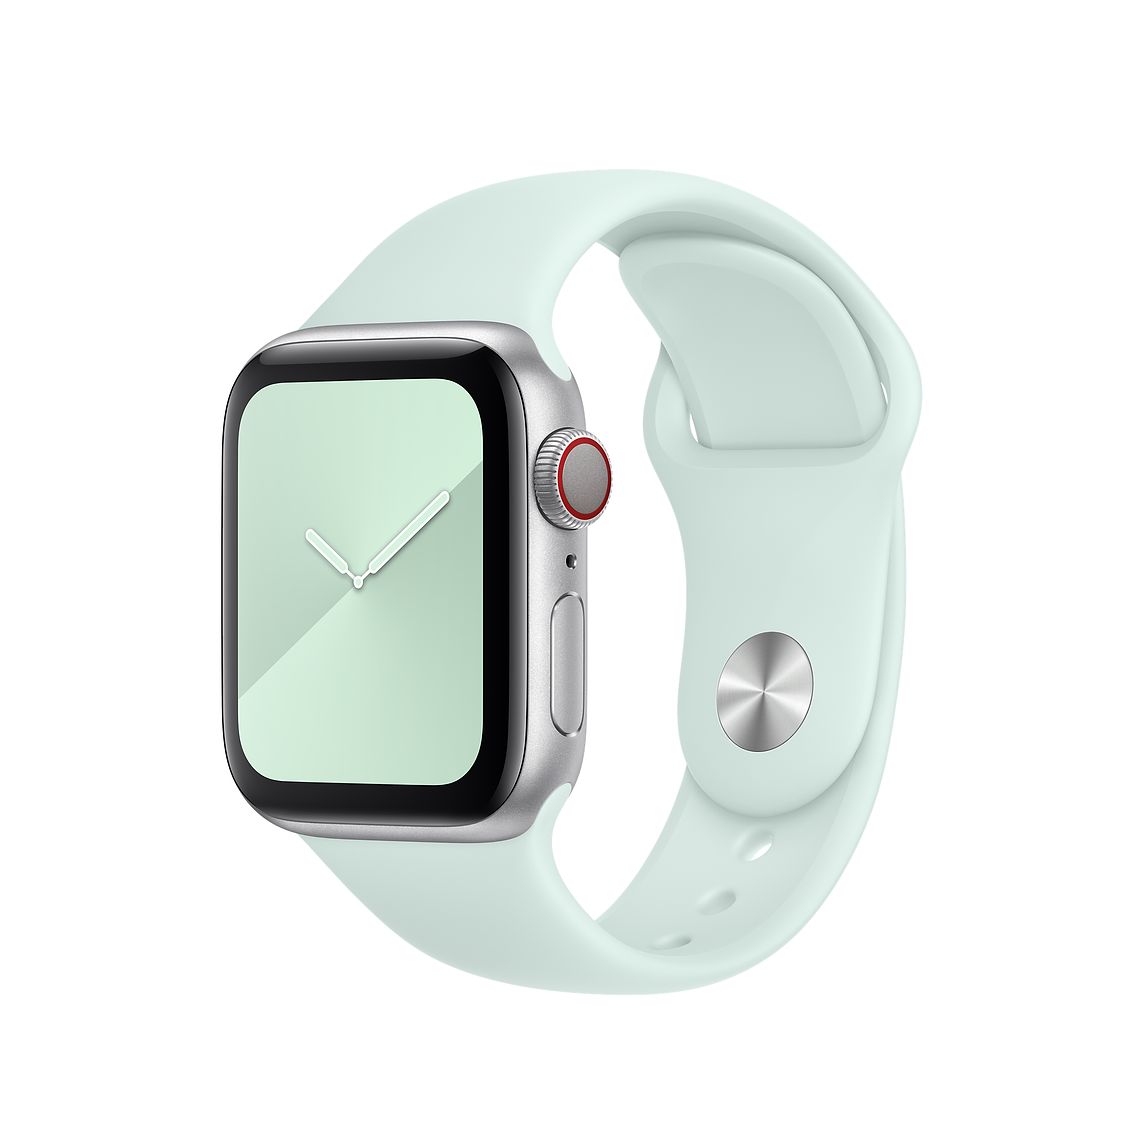 Apple Releases New Apple Watch Sport Bands and Silicone iPhone Cases